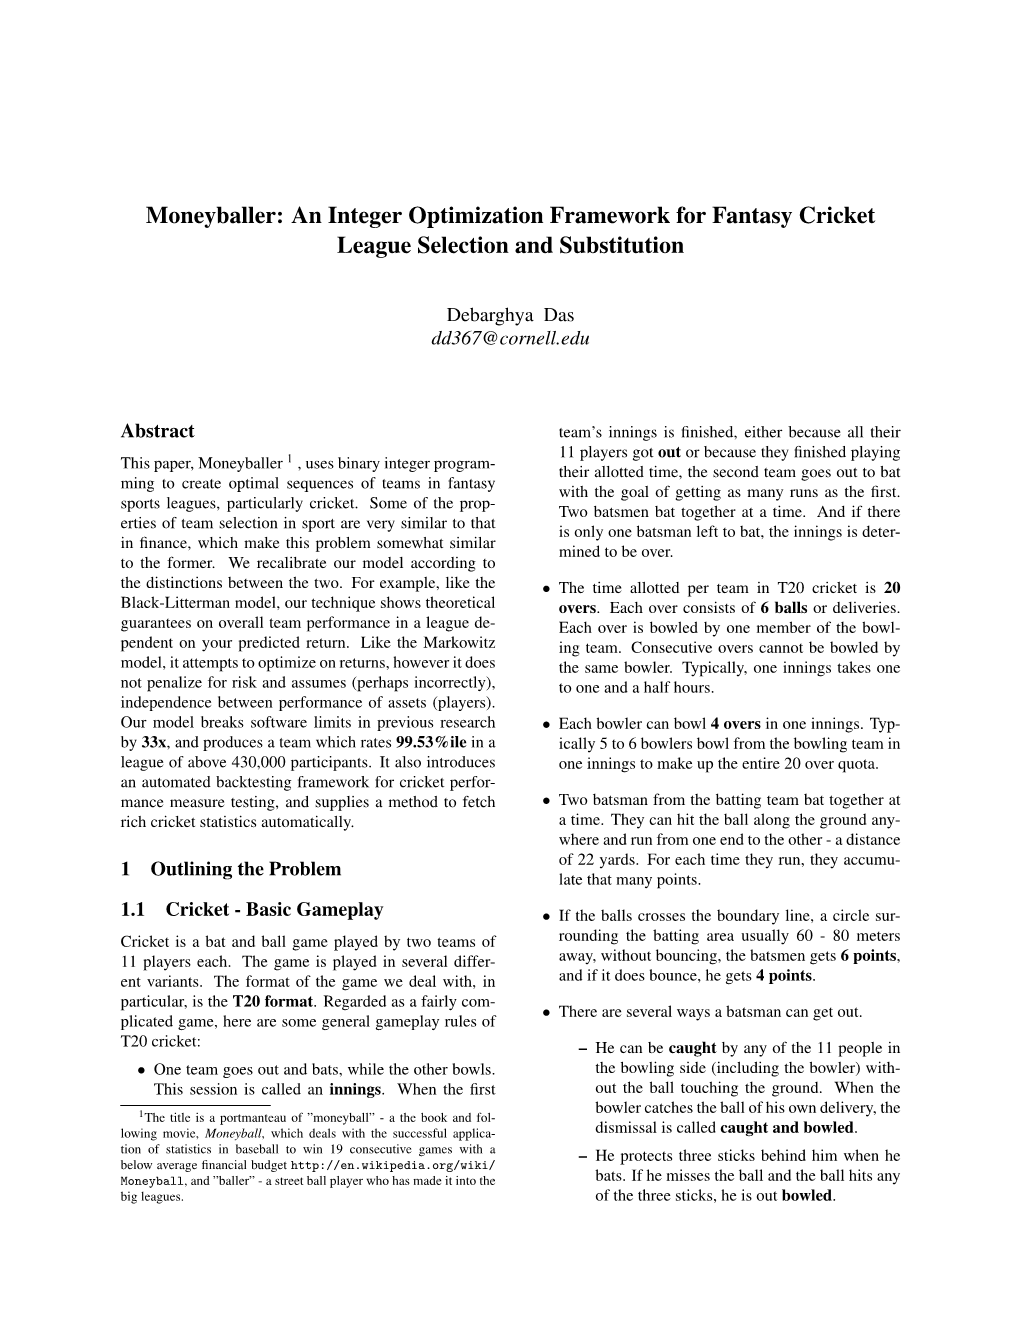 An Integer Optimization Framework for Fantasy Cricket League Selection and Substitution